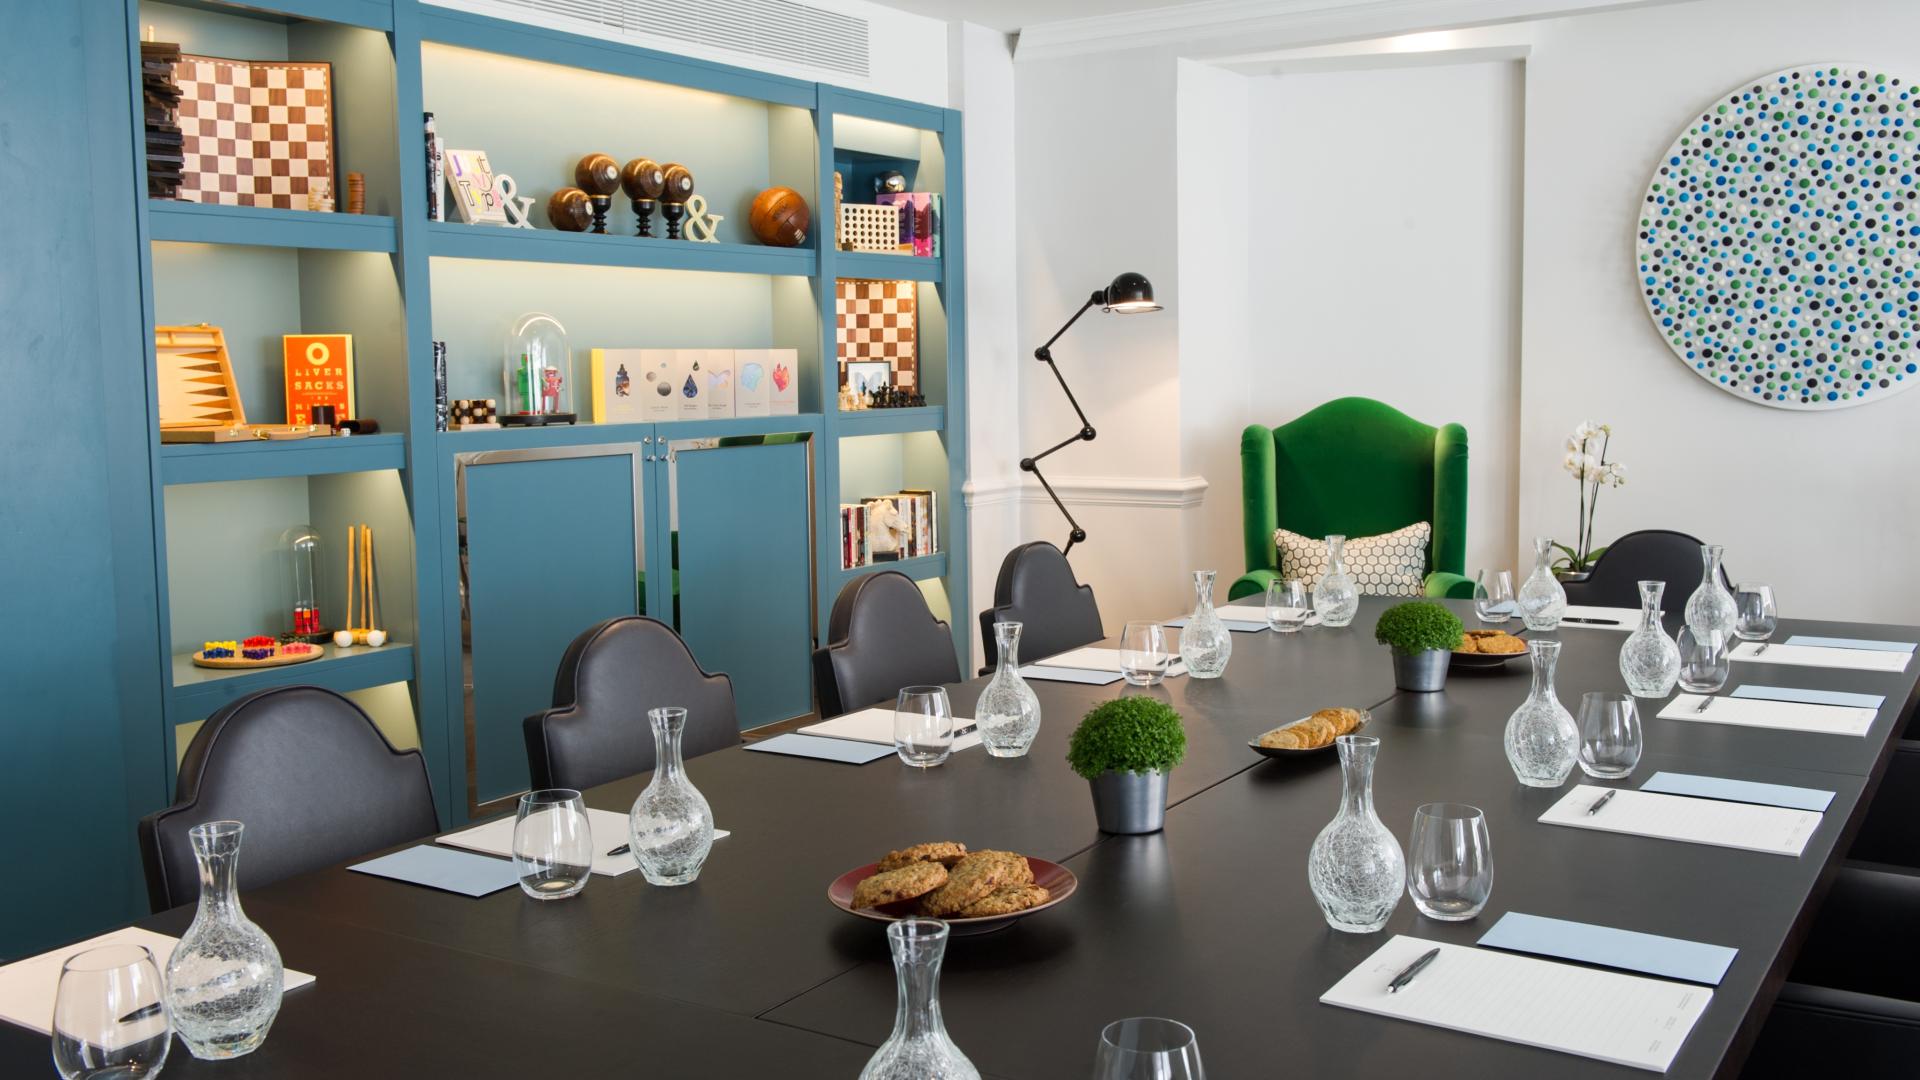 Meeting Rooms for Hire in London